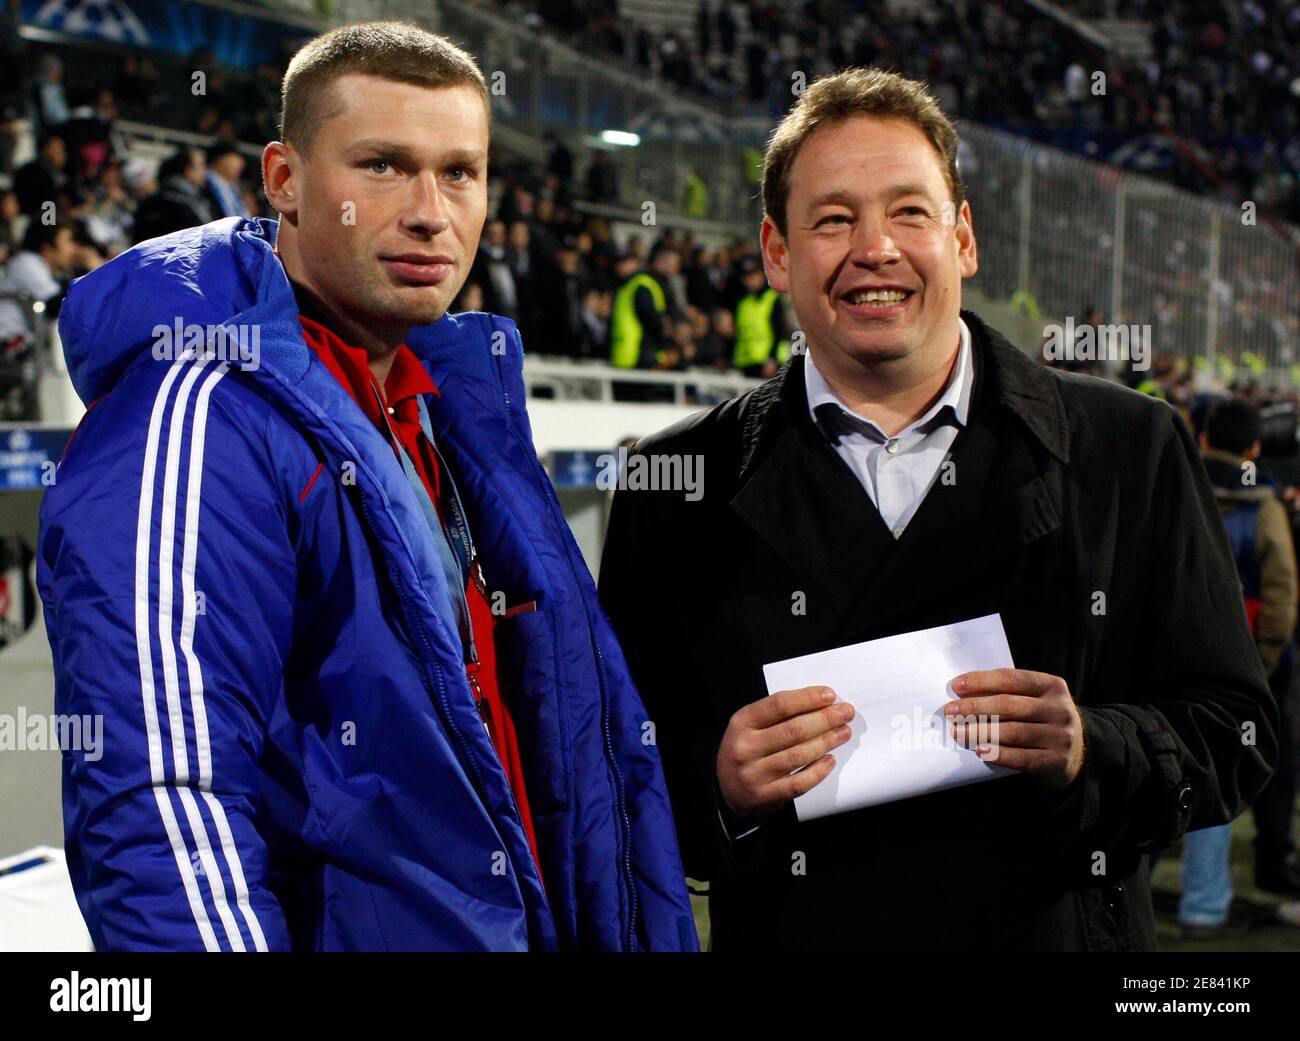 CSKA Moscow's coach Leonid Slutsky (R) chats with his defender Alexei  Berezutsky before their Champions League soccer match aginst Besiktas at  Inonu stadium in Istanbul December 8, 2009. CSKA Moscow defenders Sergei